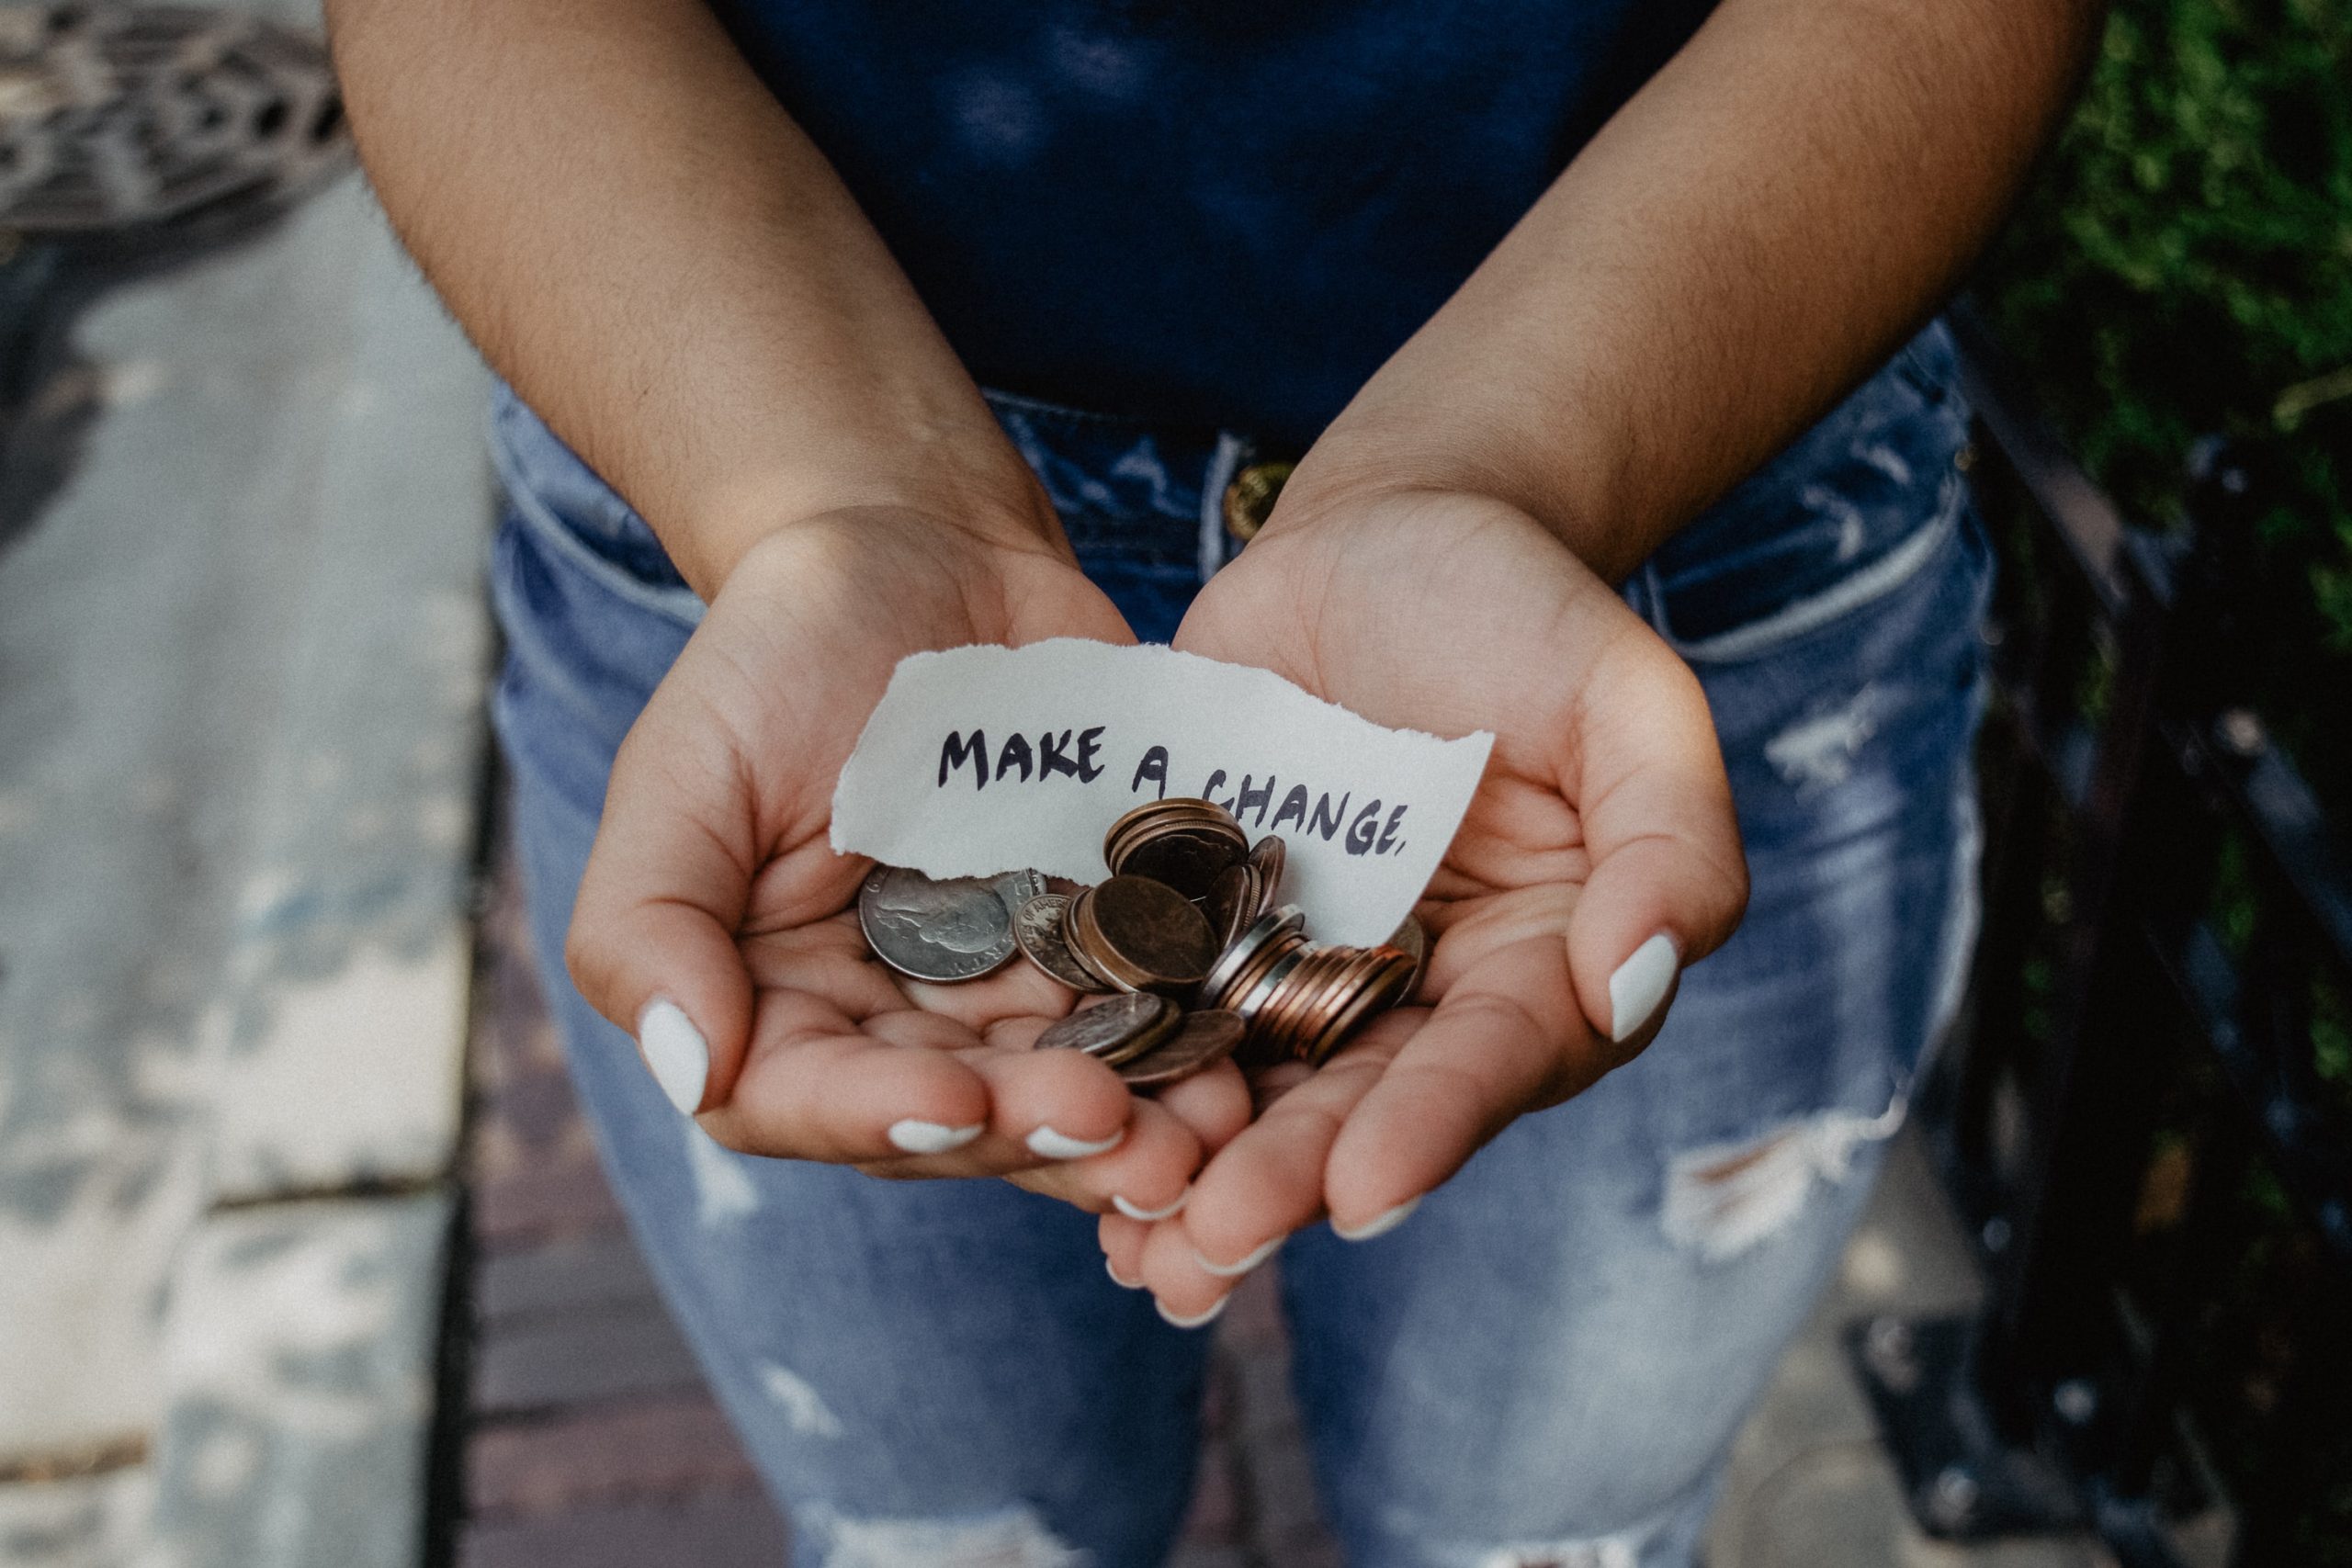 Hands holding coins and a note that says "make a change"